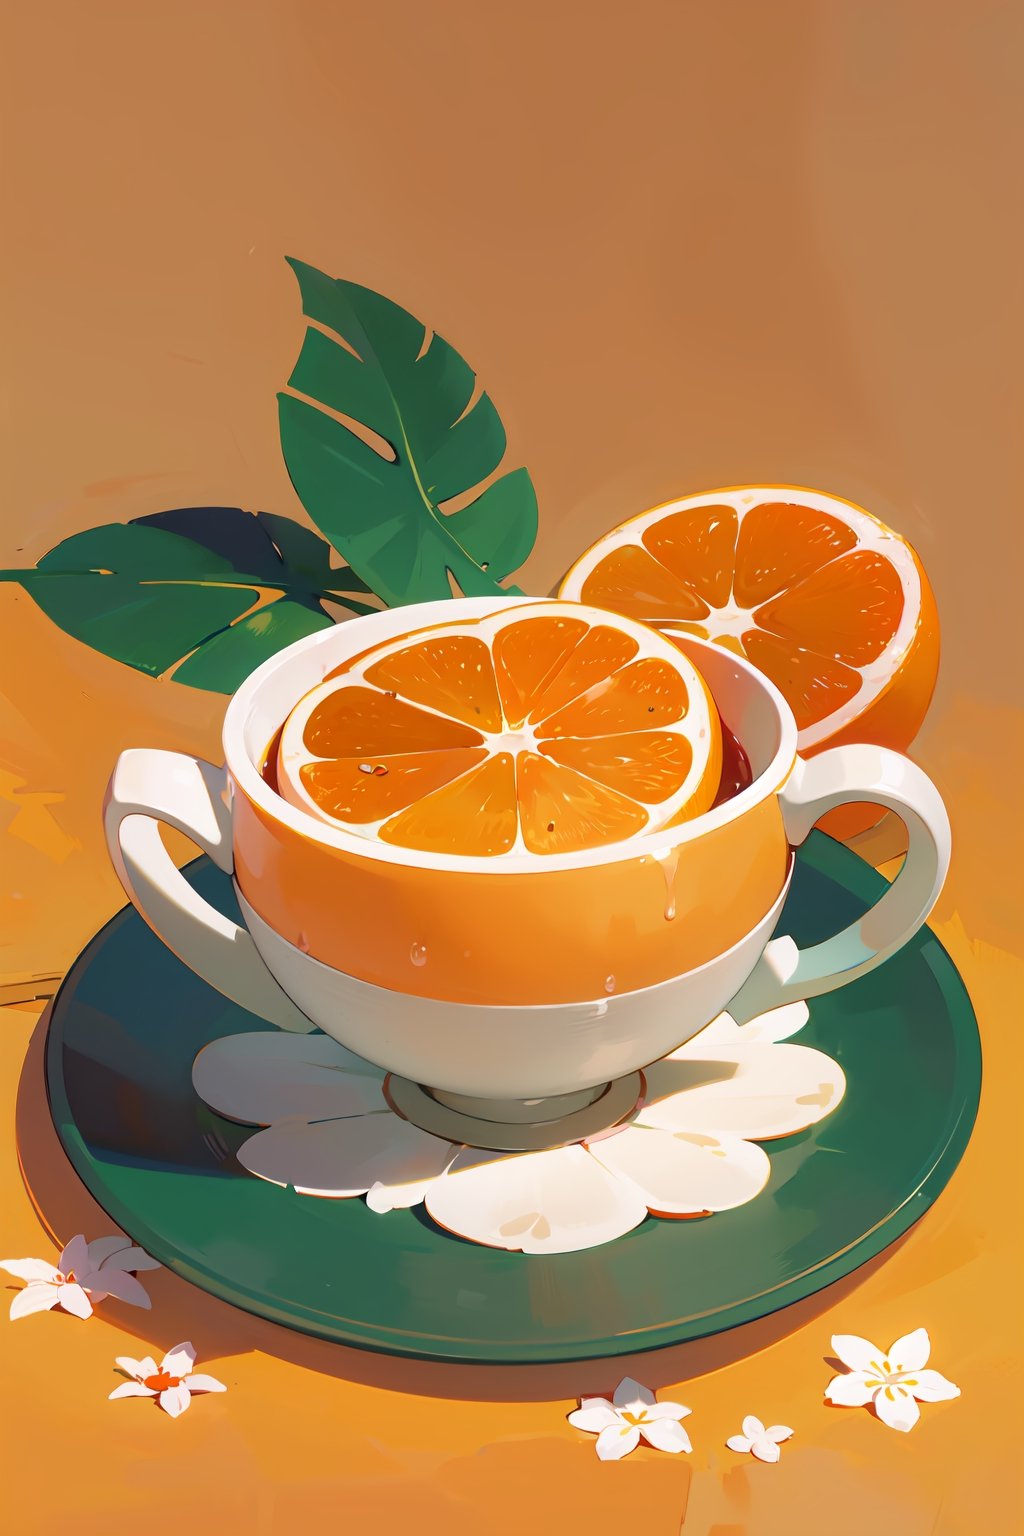 fruits on plate, cup, detail, floral orange background, no people,ISO_SHOP